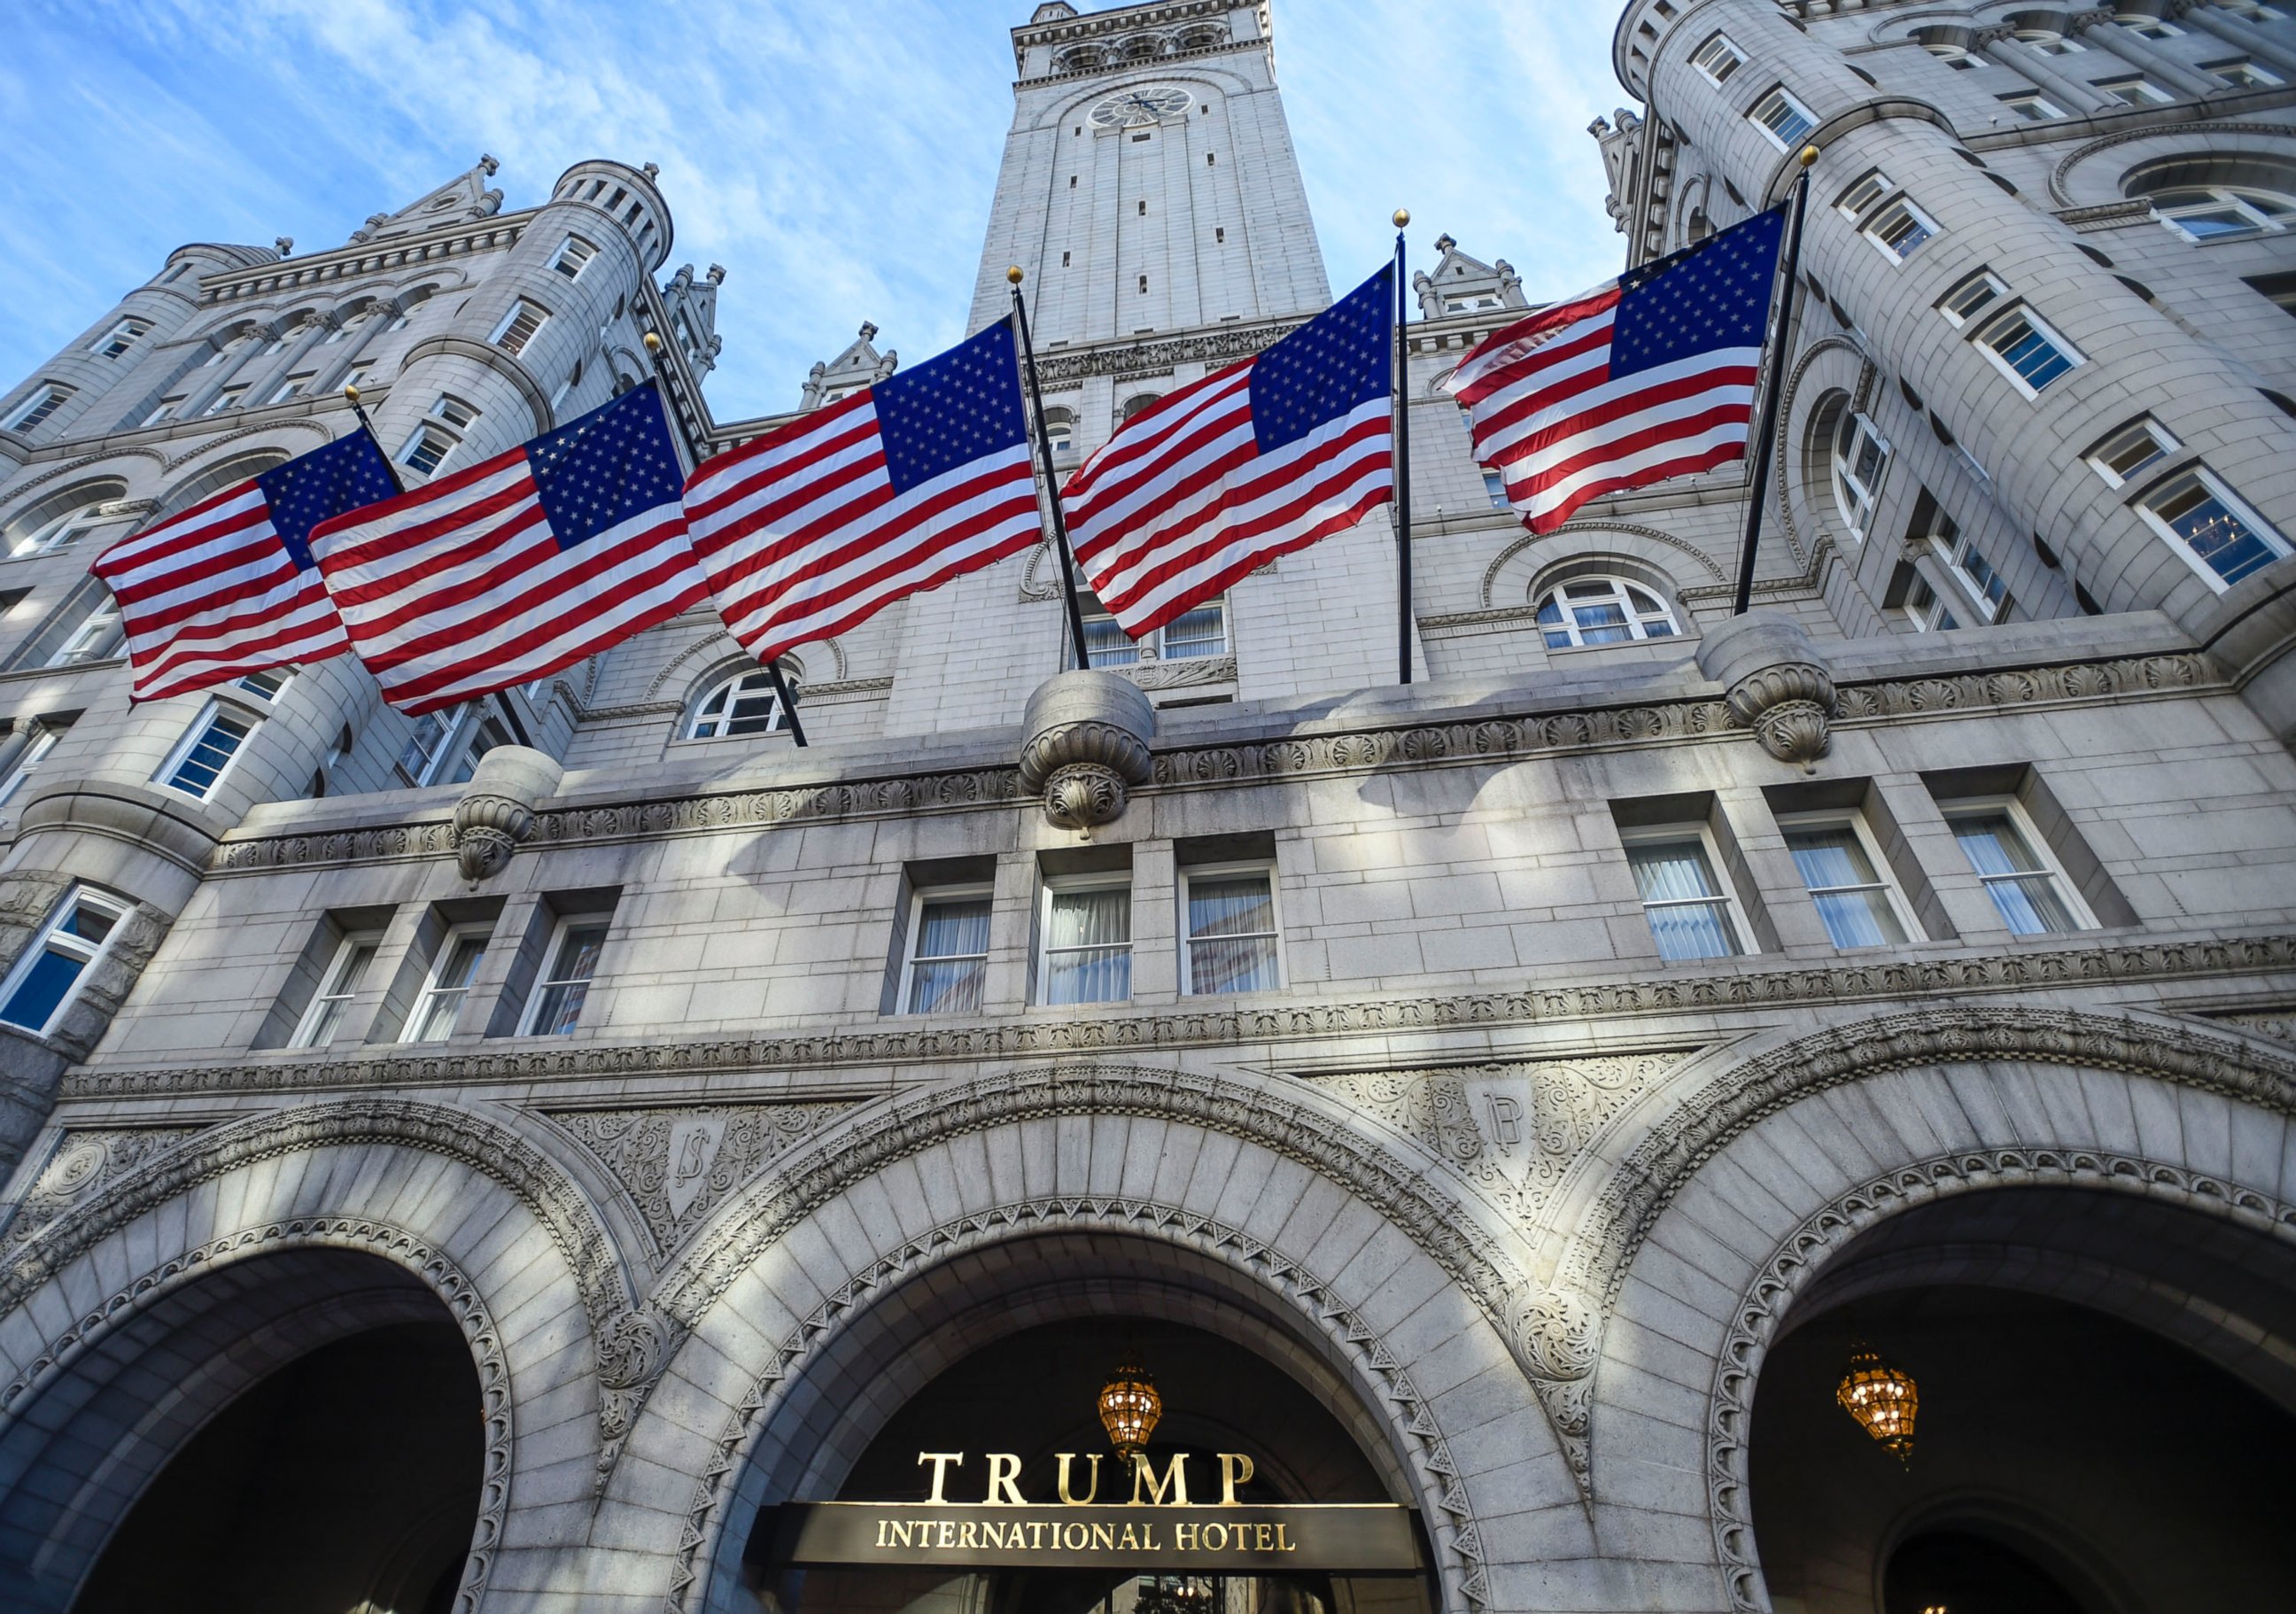 PHOTO: The Trump International Hotel in Washington, D.C. is seen here at the Old Post Office, Nov. 11, 2016.